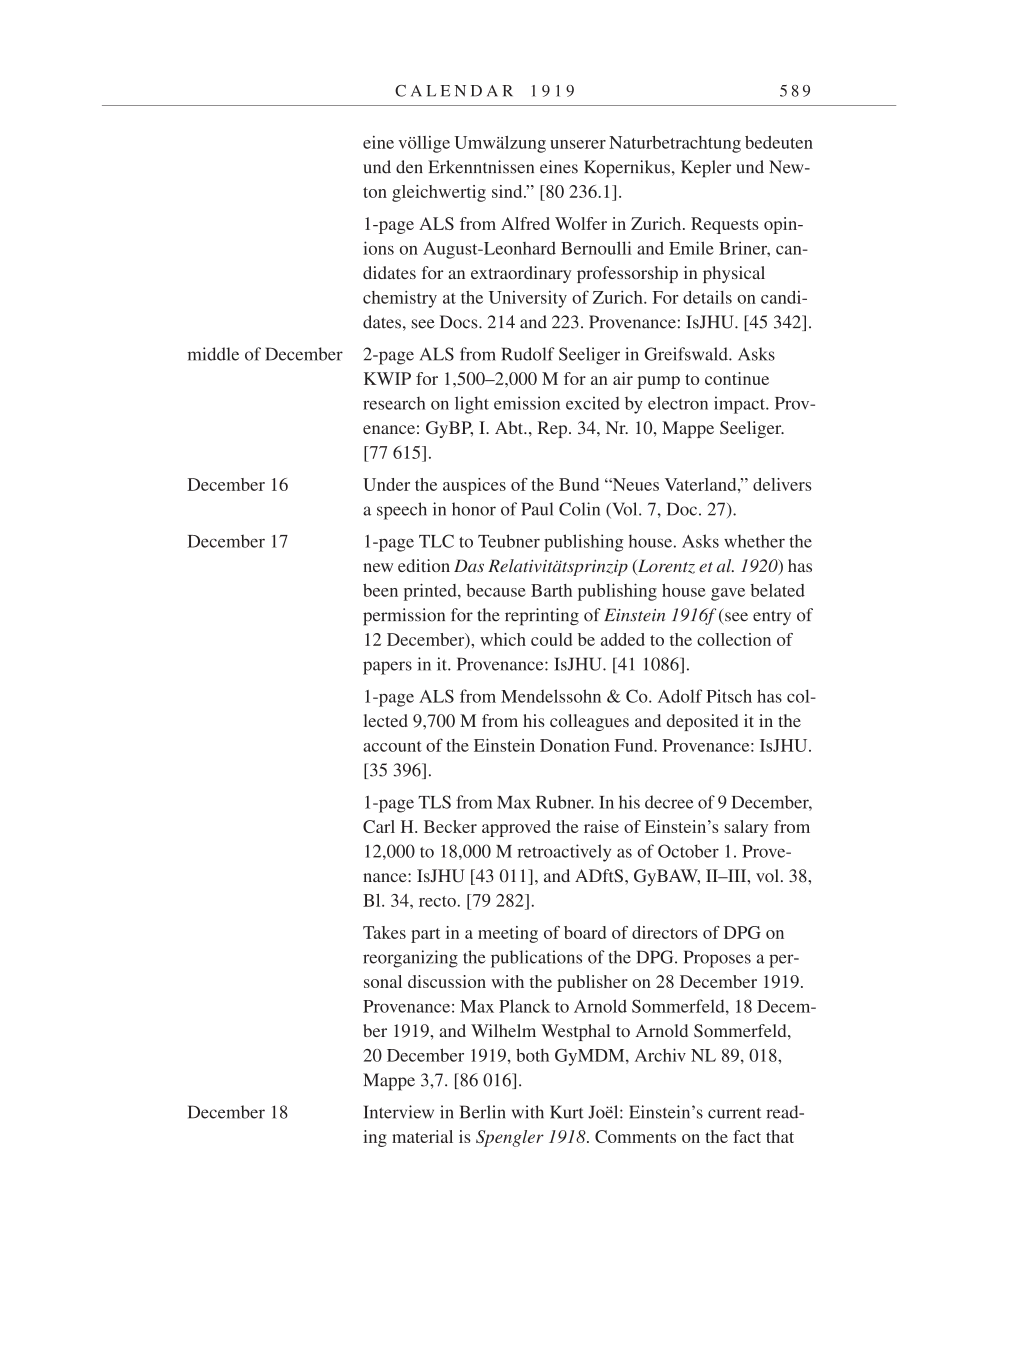 Volume 9: The Berlin Years: Correspondence January 1919-April 1920 page 589